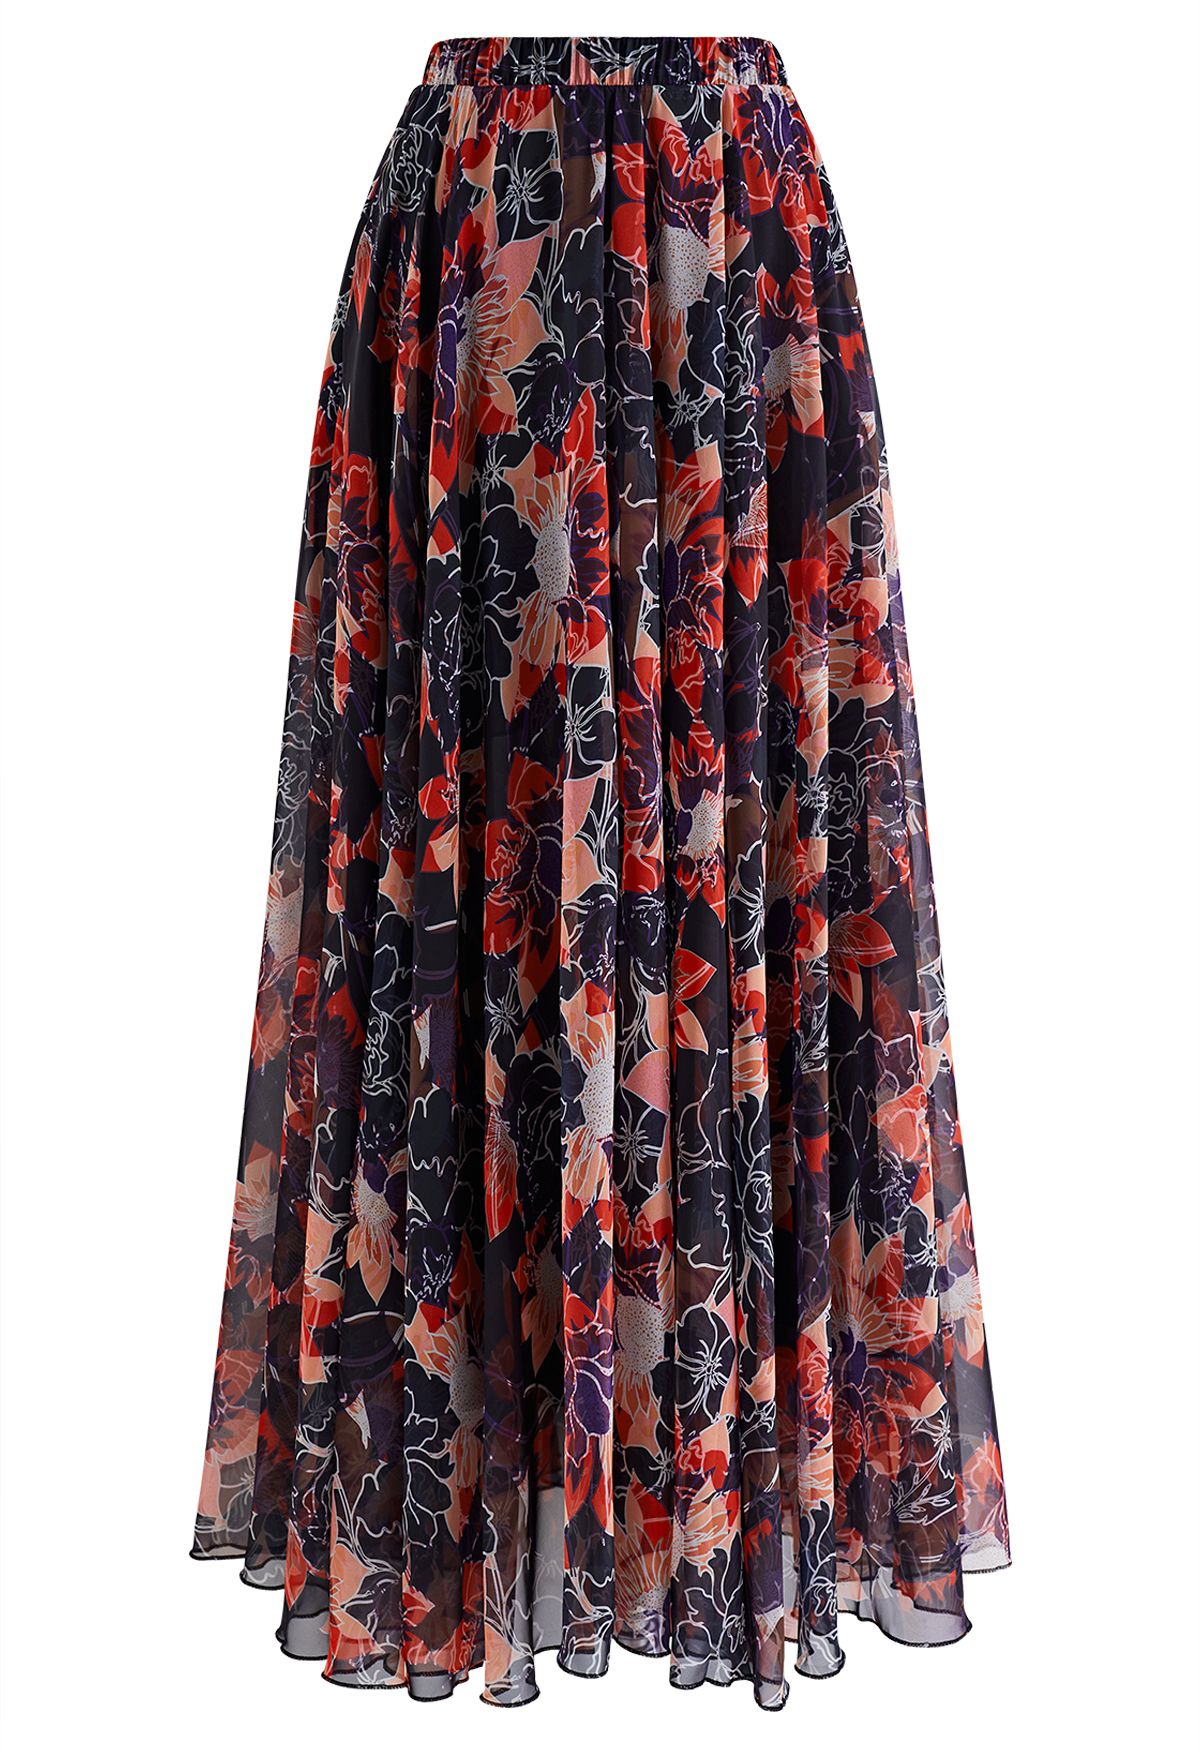 Fully Bloomed Red Floral Chiffon Maxi Skirt - Retro, Indie and Unique ...